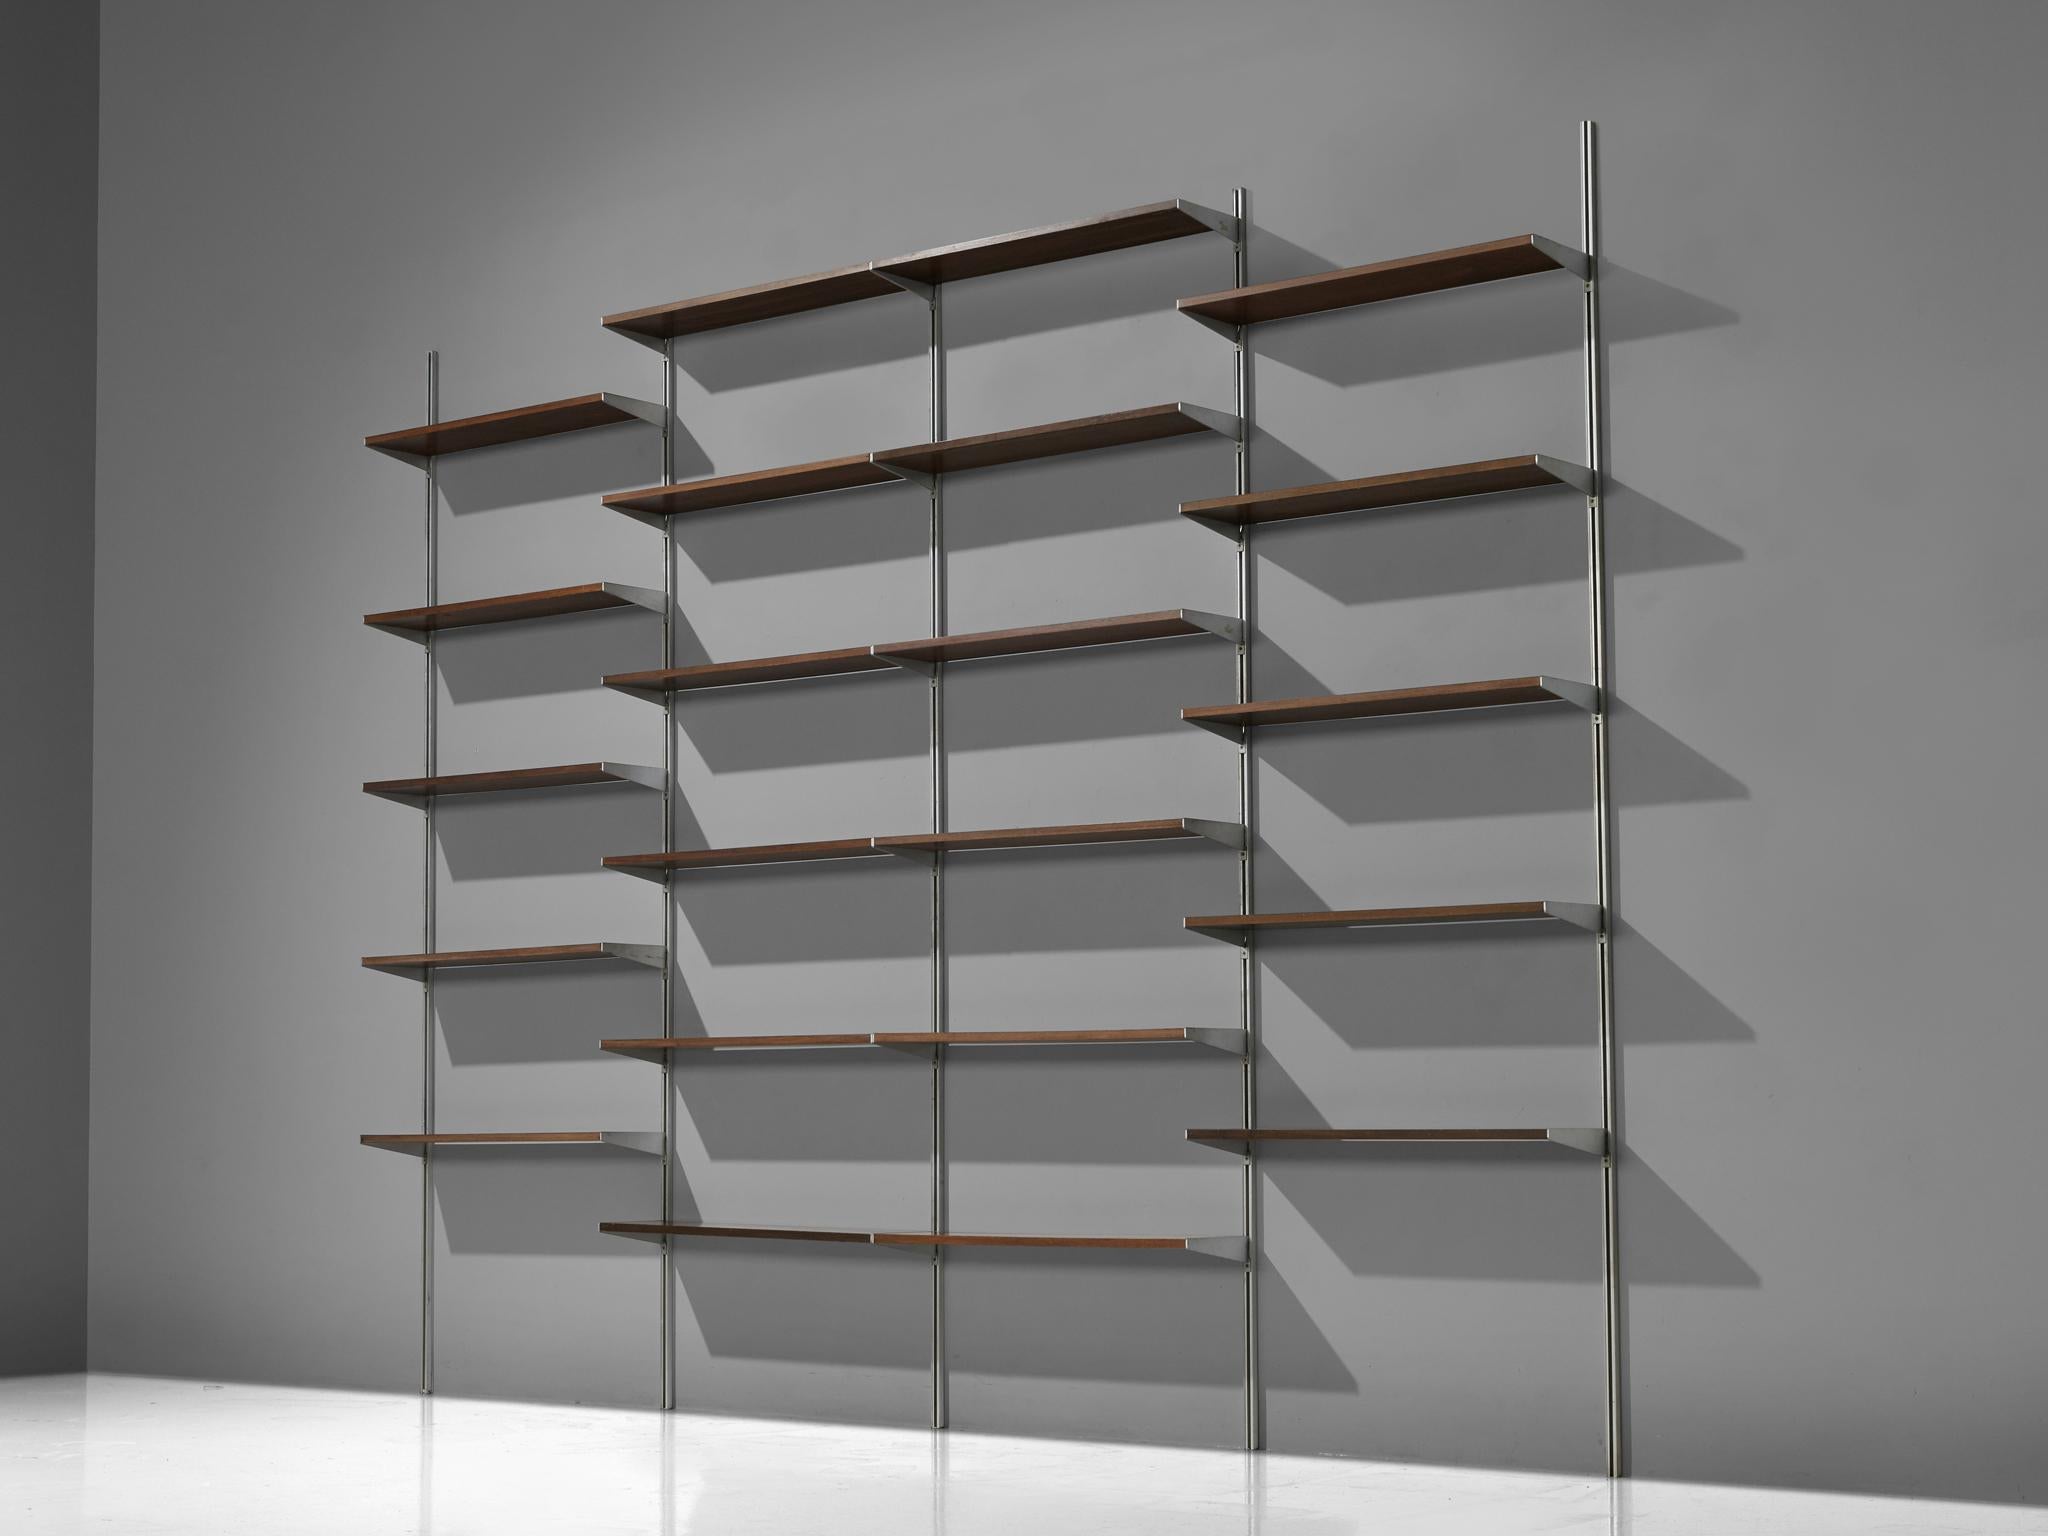 George Nelson for Herman Miller, 'Comprehensive Storage System (CSS)' wall unit, steel, aluminum, walnut, United States, 1960s

This storage system is designed by Nelson in the 1960s for Herman Miller. It's official name is the 'Comprehensive